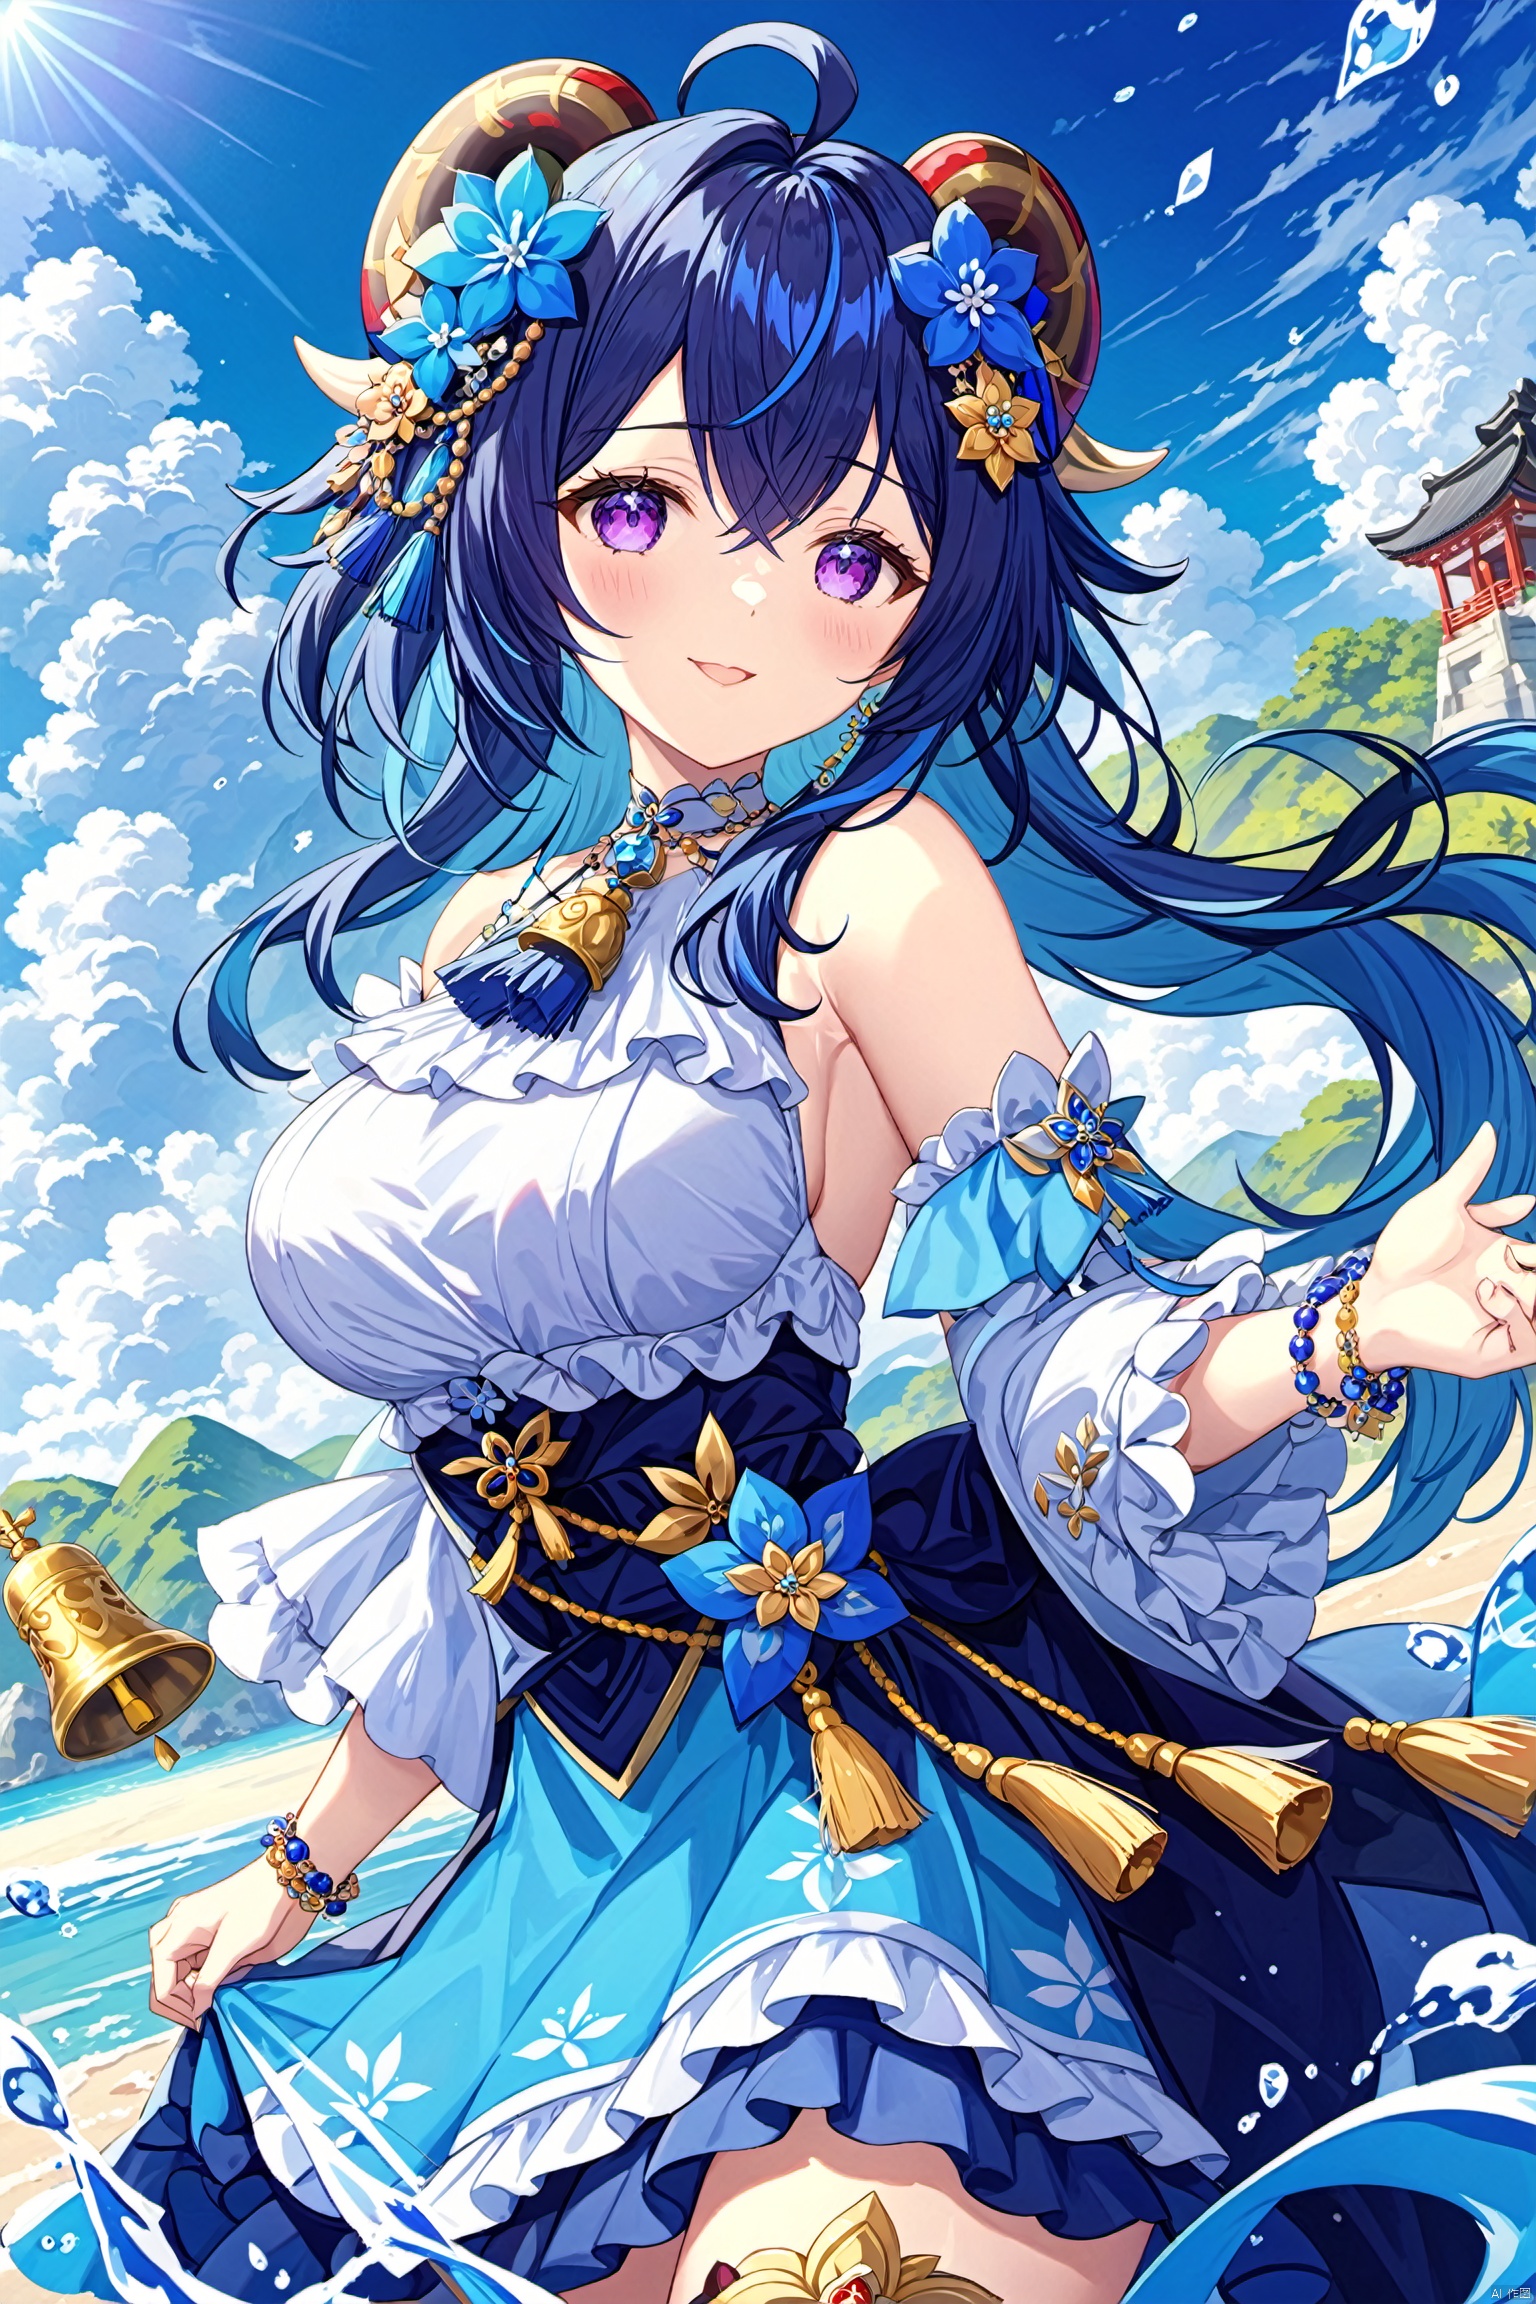  The subject is a single female character with long hair, noticeable breasts, and an engaging gaze towards the viewer. She has a pleasant smile with her mouth slightly open. Her hairstyle includes bangs and sidelocks, complementing her elegant dress adorned with jewelry. She possesses medium-sized breasts and distinctive blue hair that beautifully contrasts with her purple eyes. A flower accessory adorns her head along with an ahoge. The scene takes place outdoors under a sky filled with clouds, where she gracefully raises her arms showcasing delicate bracelets against the backdrop of a serene blue sky. A bell necklace hangs around her neck while she stands in shallow water surrounded by frills and horns. Additionally, she wears an alternate costume featuring tassels and holds a blue flower called "Vision" from the game Genshin Impact, representing the character named Ganyu.